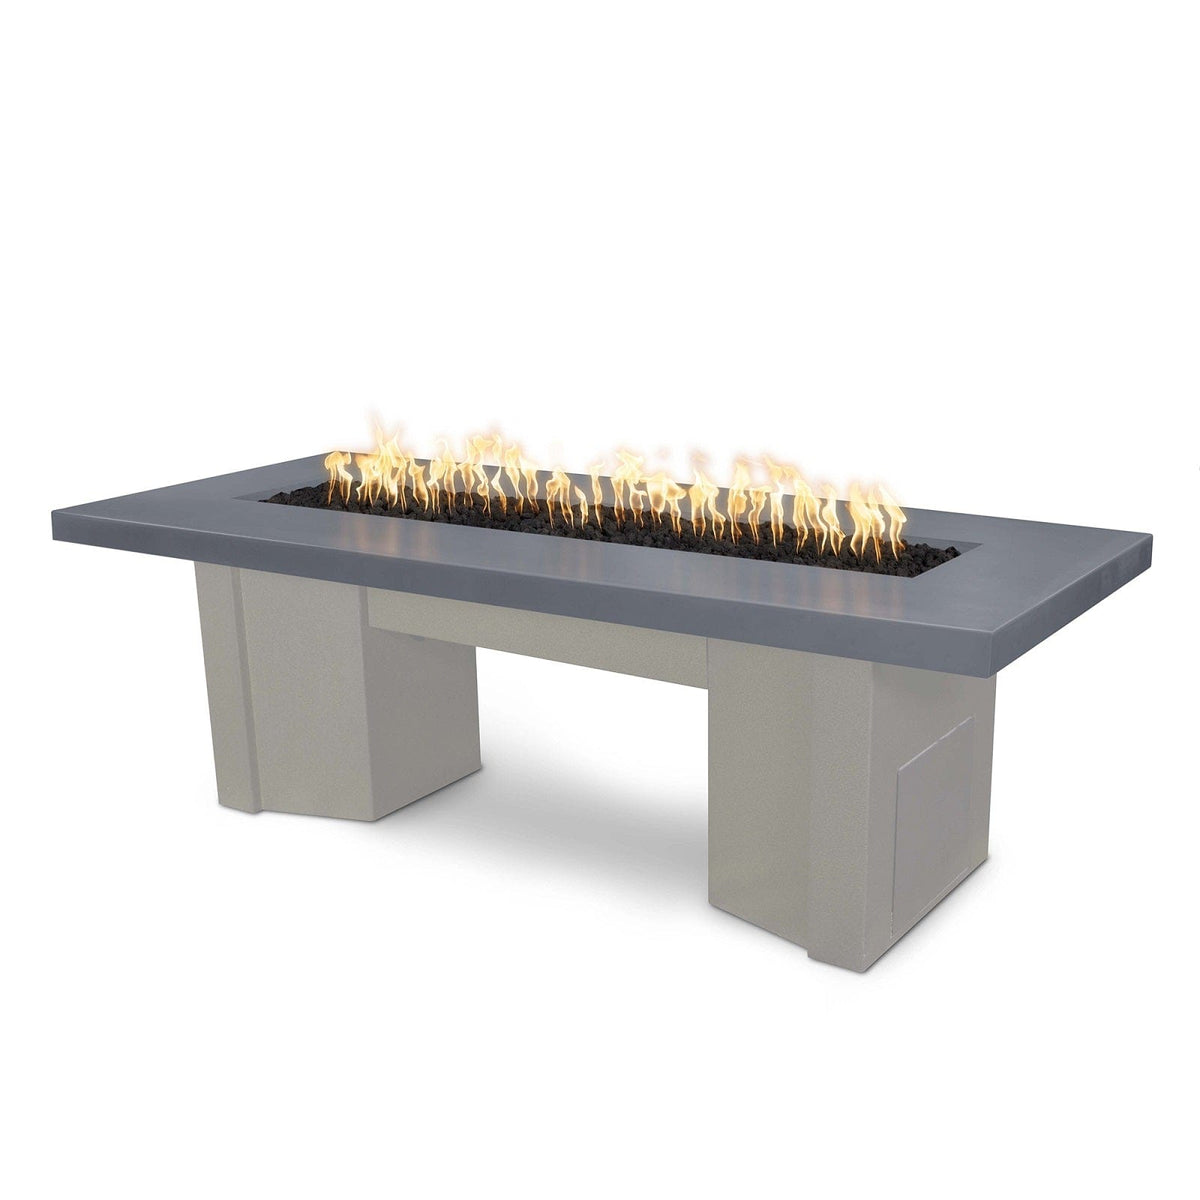 The Outdoor Plus Fire Features Gray (-GRY) / Pewter Powder Coated Steel (-PEW) The Outdoor Plus 60&quot; Alameda Fire Table Smooth Concrete in Natural Gas - 110V Plug &amp; Play Electronic Ignition / OPT-ALMGFRC60EKIT-NG